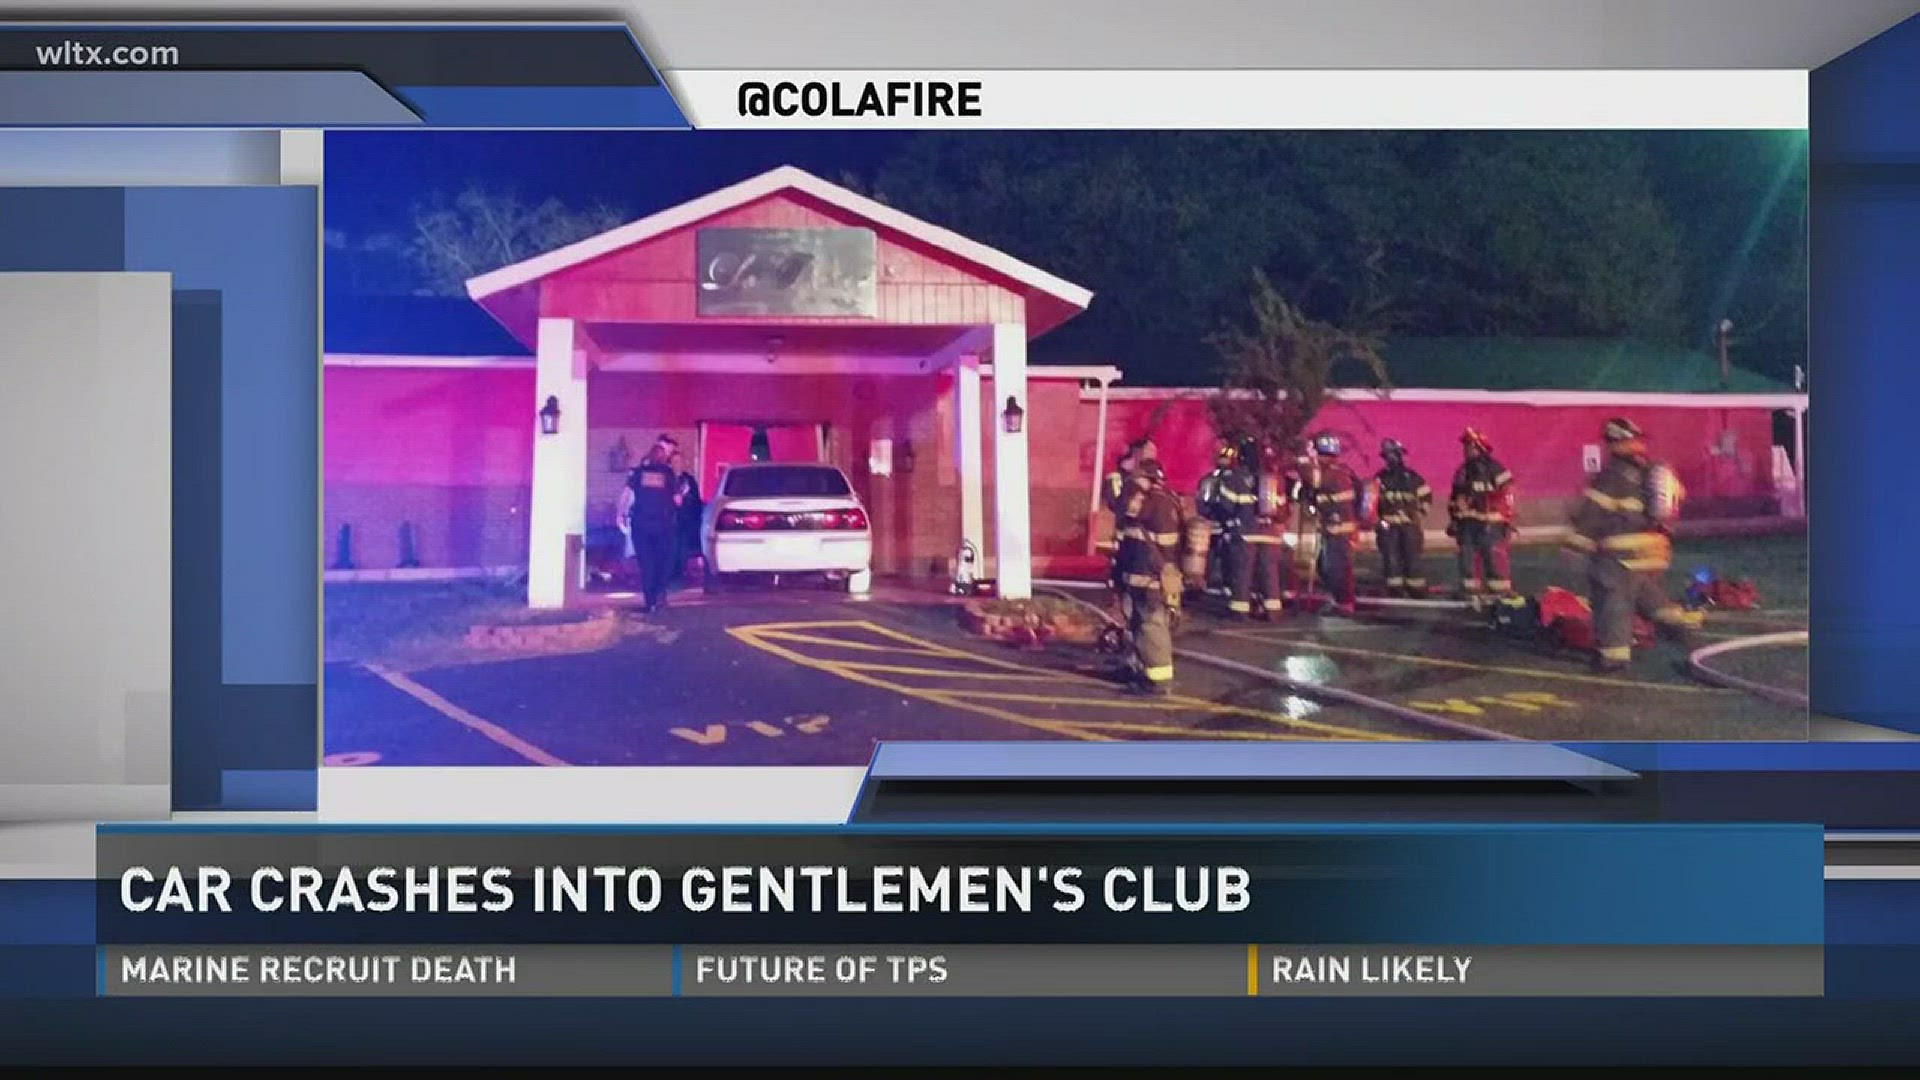 Authorities are investigating after a car crashed into a gentlemen's club overnight in Columbia. the incident happened at around 4 this morning at LaRoice Gentlemen's Club, located on Carrie Anderson Road...	According to firefighters, the car hit the fro